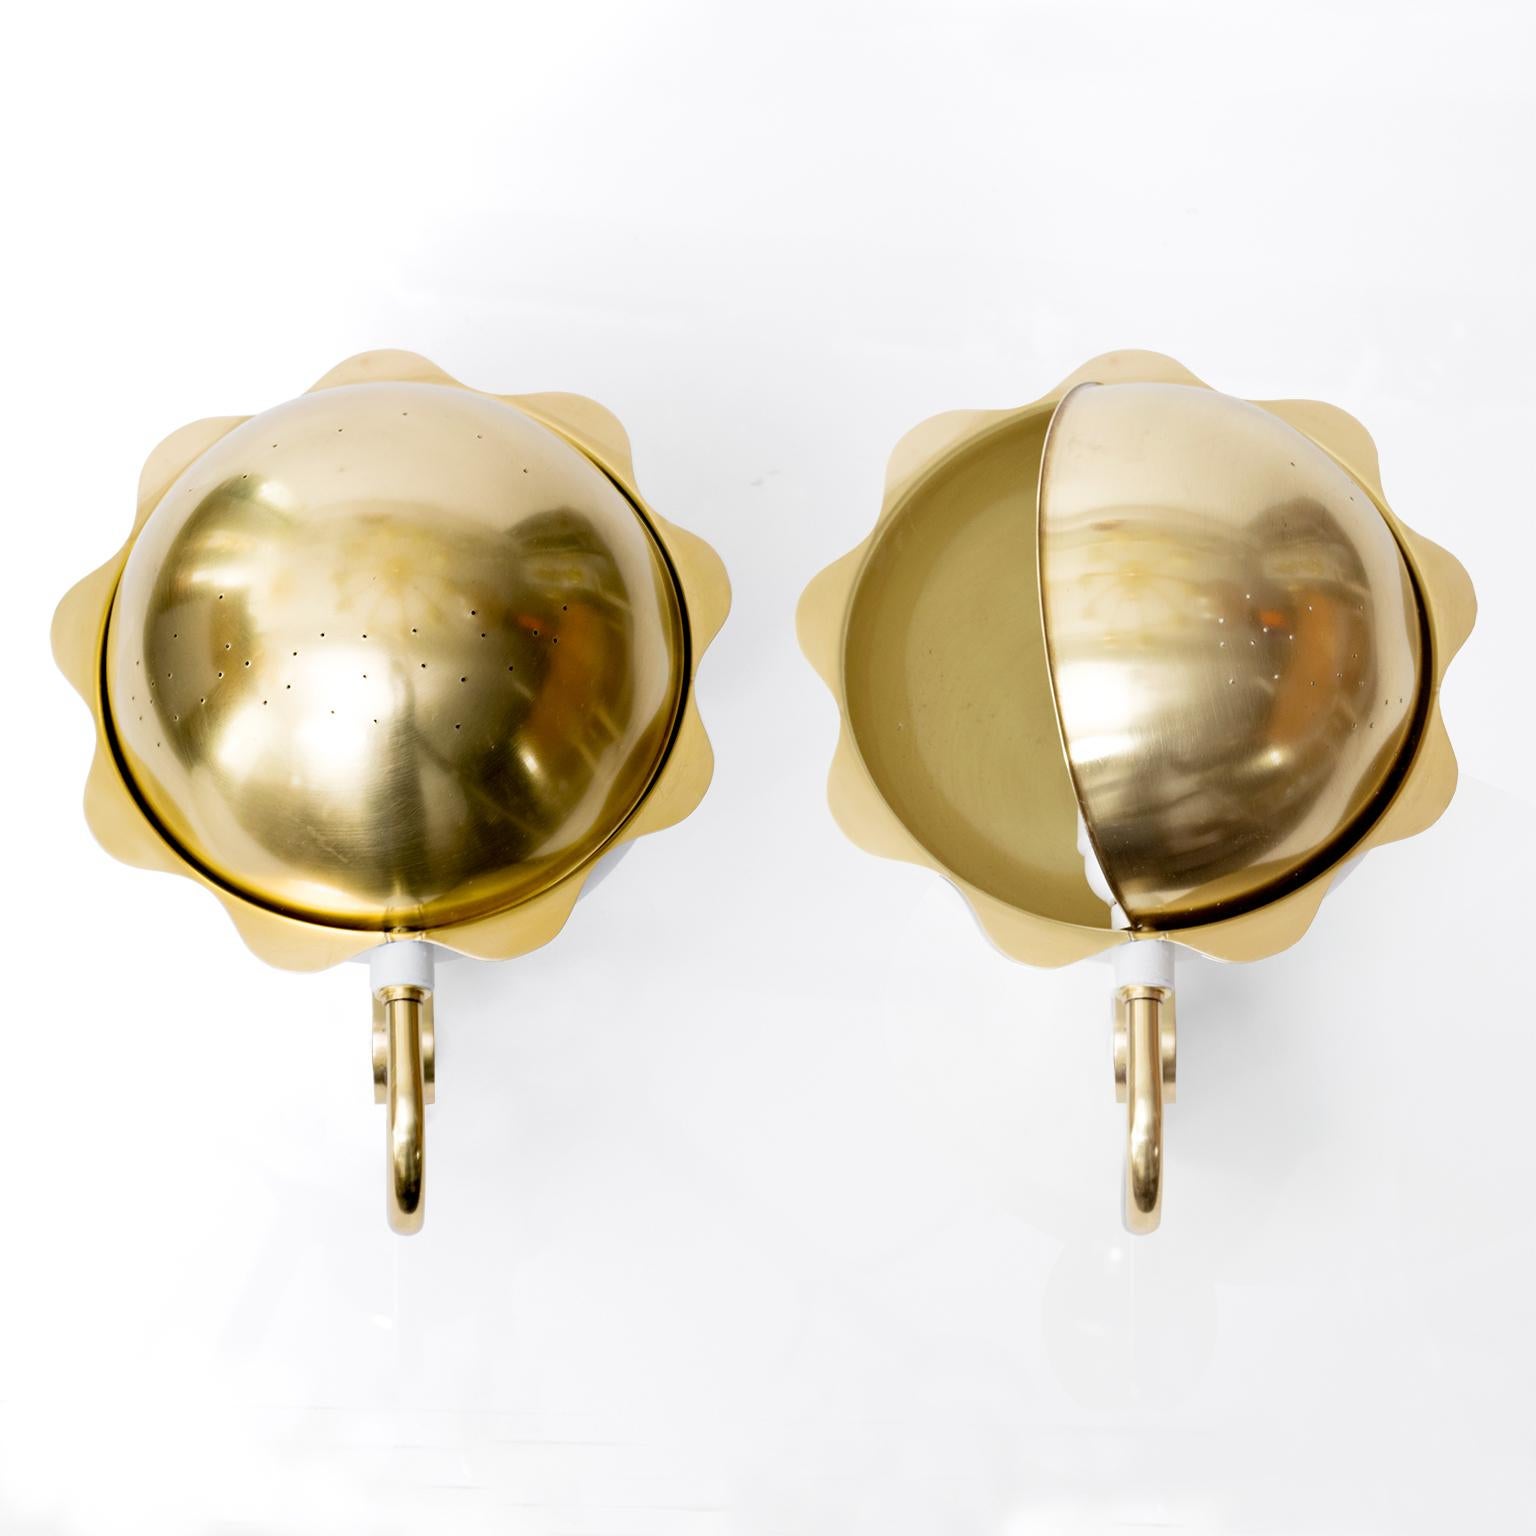 Edvard Hagman Scandinavian Modern Eclipse Sconces, Polished Brass White Lacquer In Excellent Condition In New York, NY